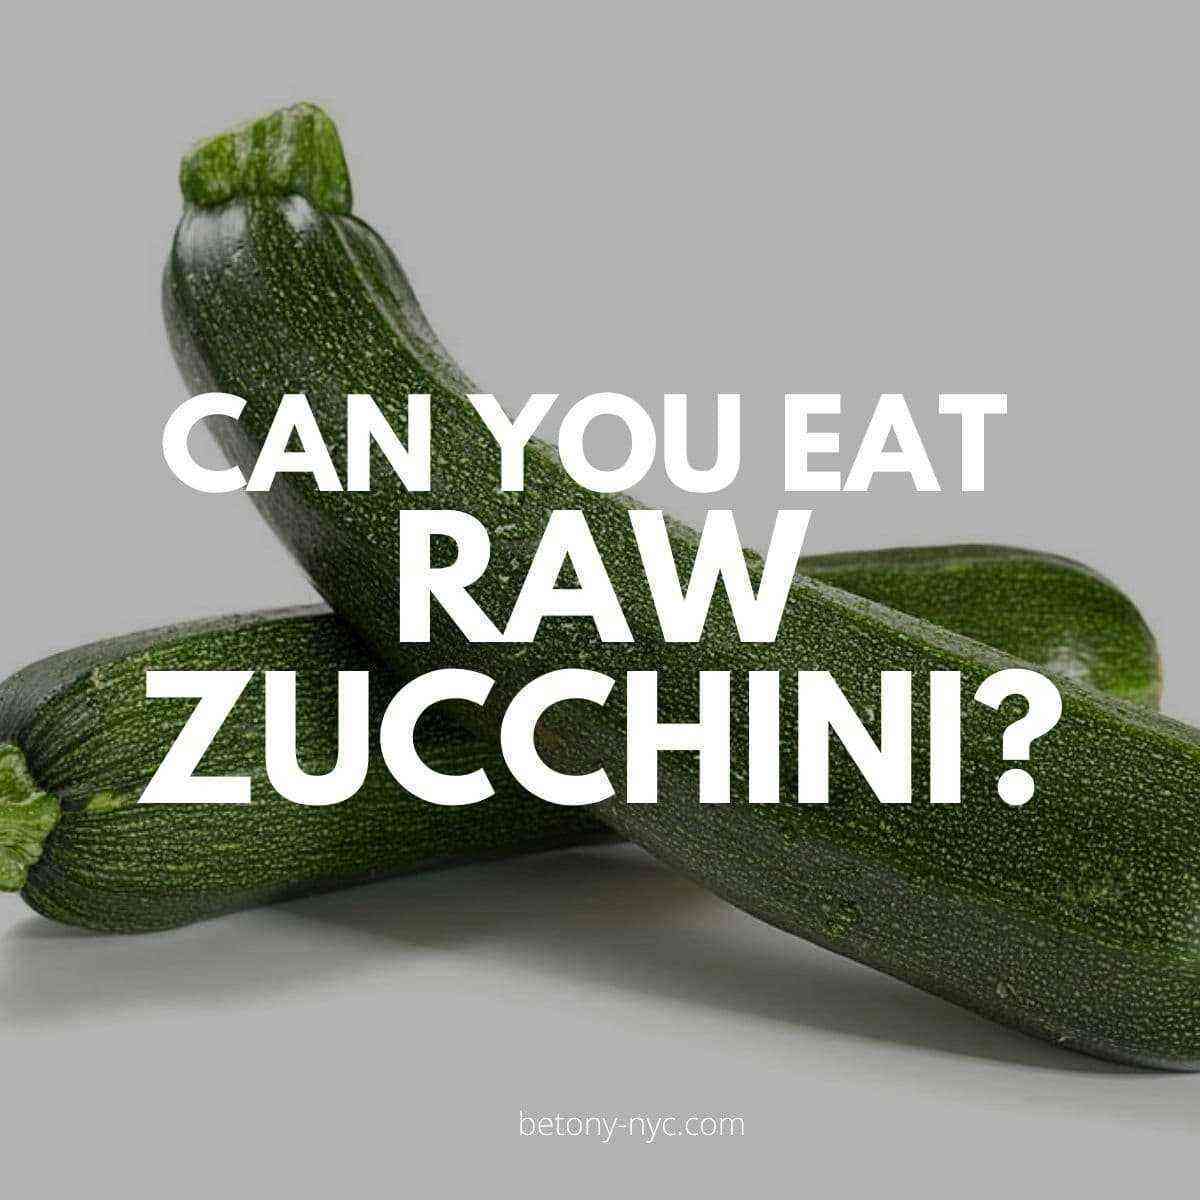 The benefits and harms of eating raw zucchini